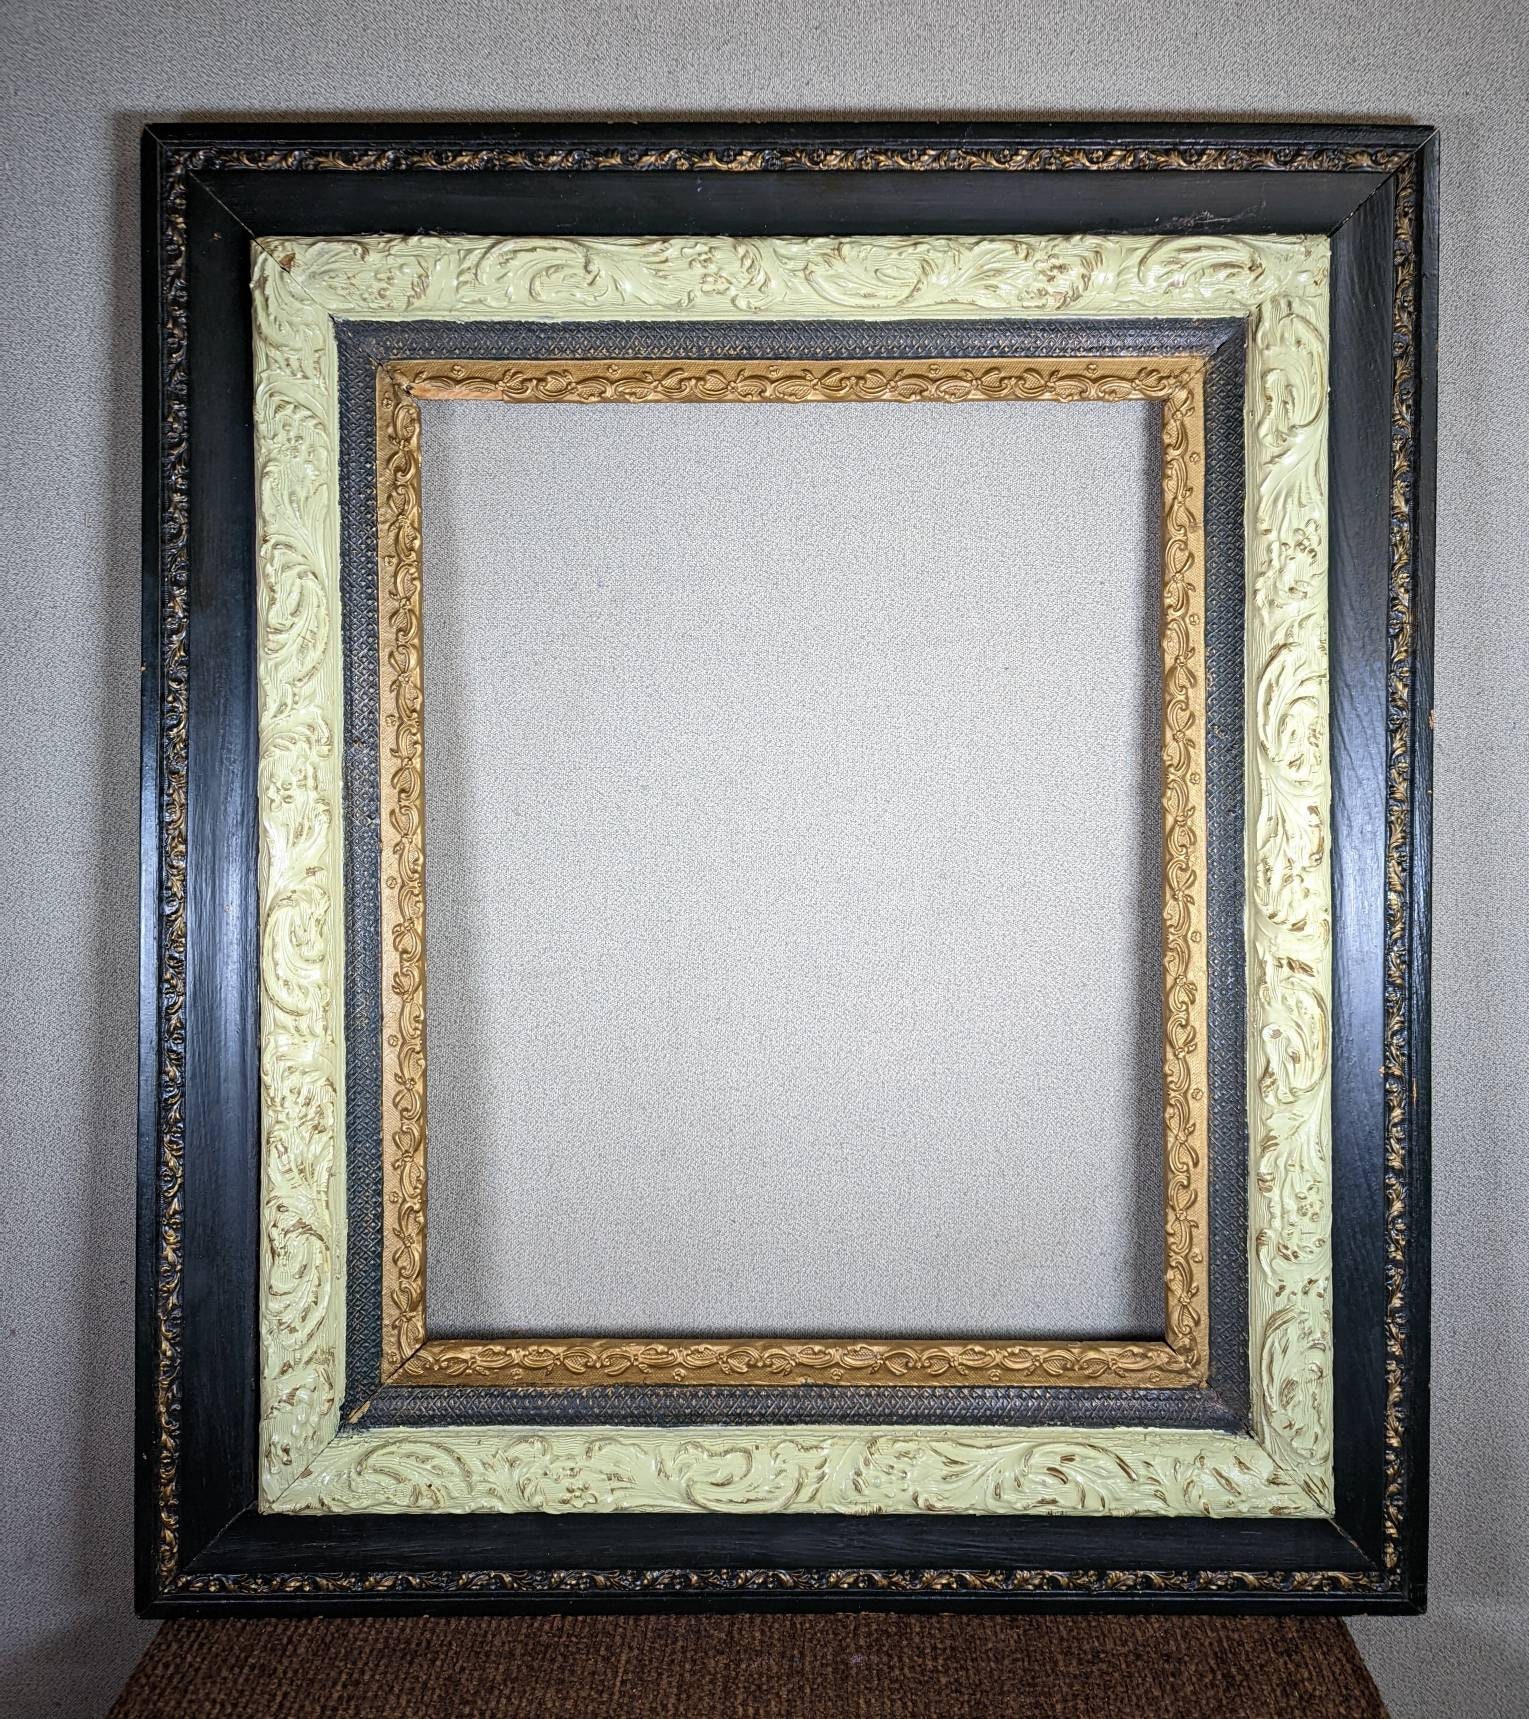 Picture Framing Mat Black with Gold liner 11x14 for 8x10 Photo or Art  Rectangle Cutout